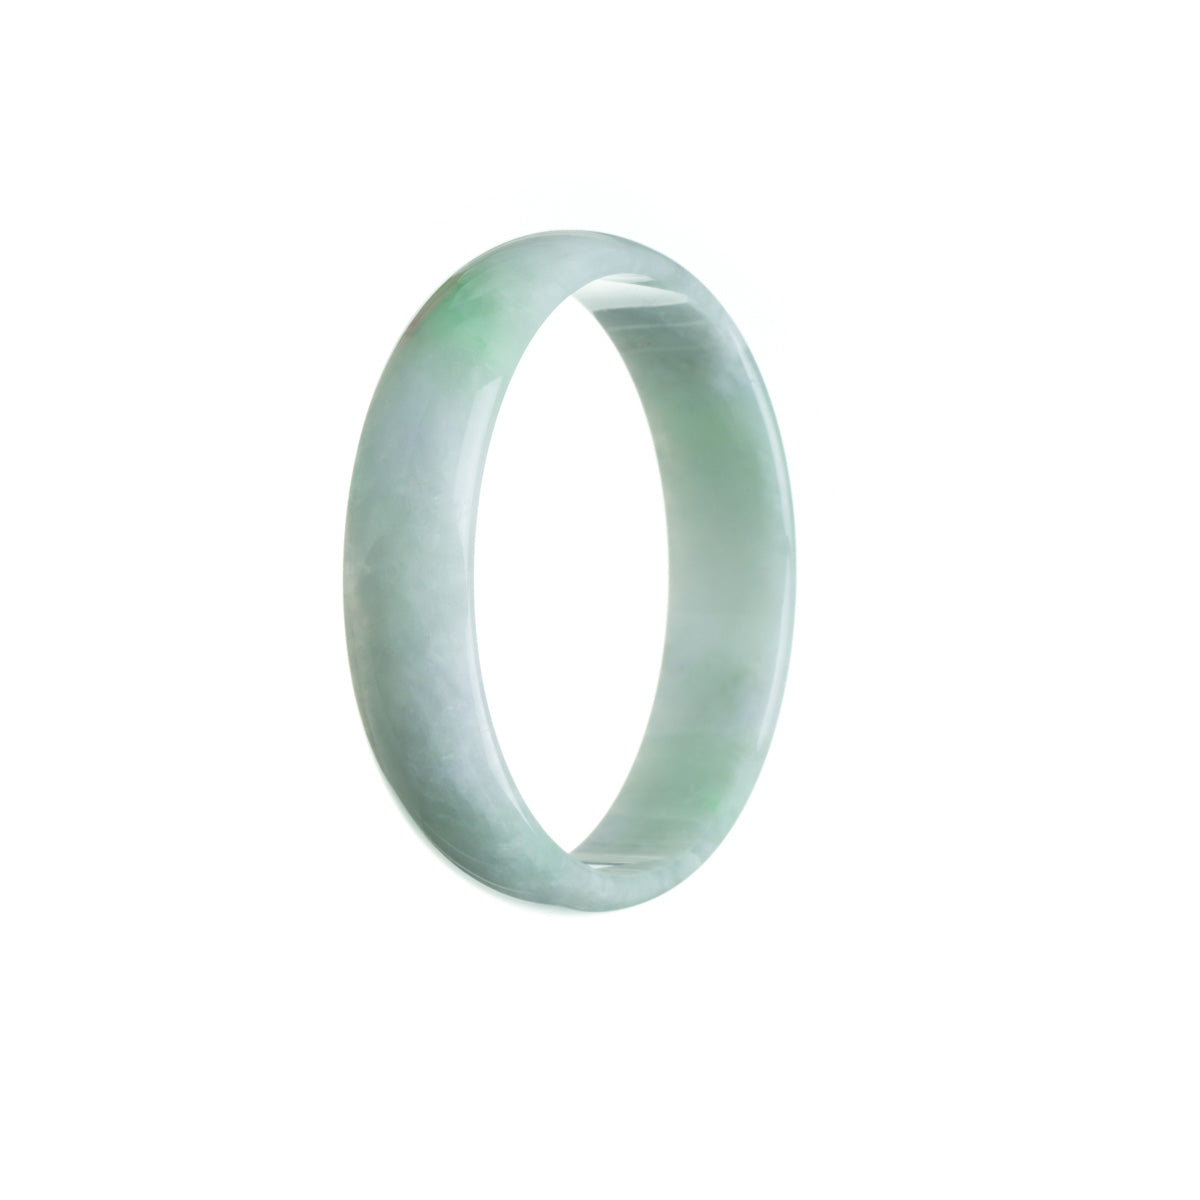 Real Grade A White with green Traditional Jade Bangle - 52mm Flat